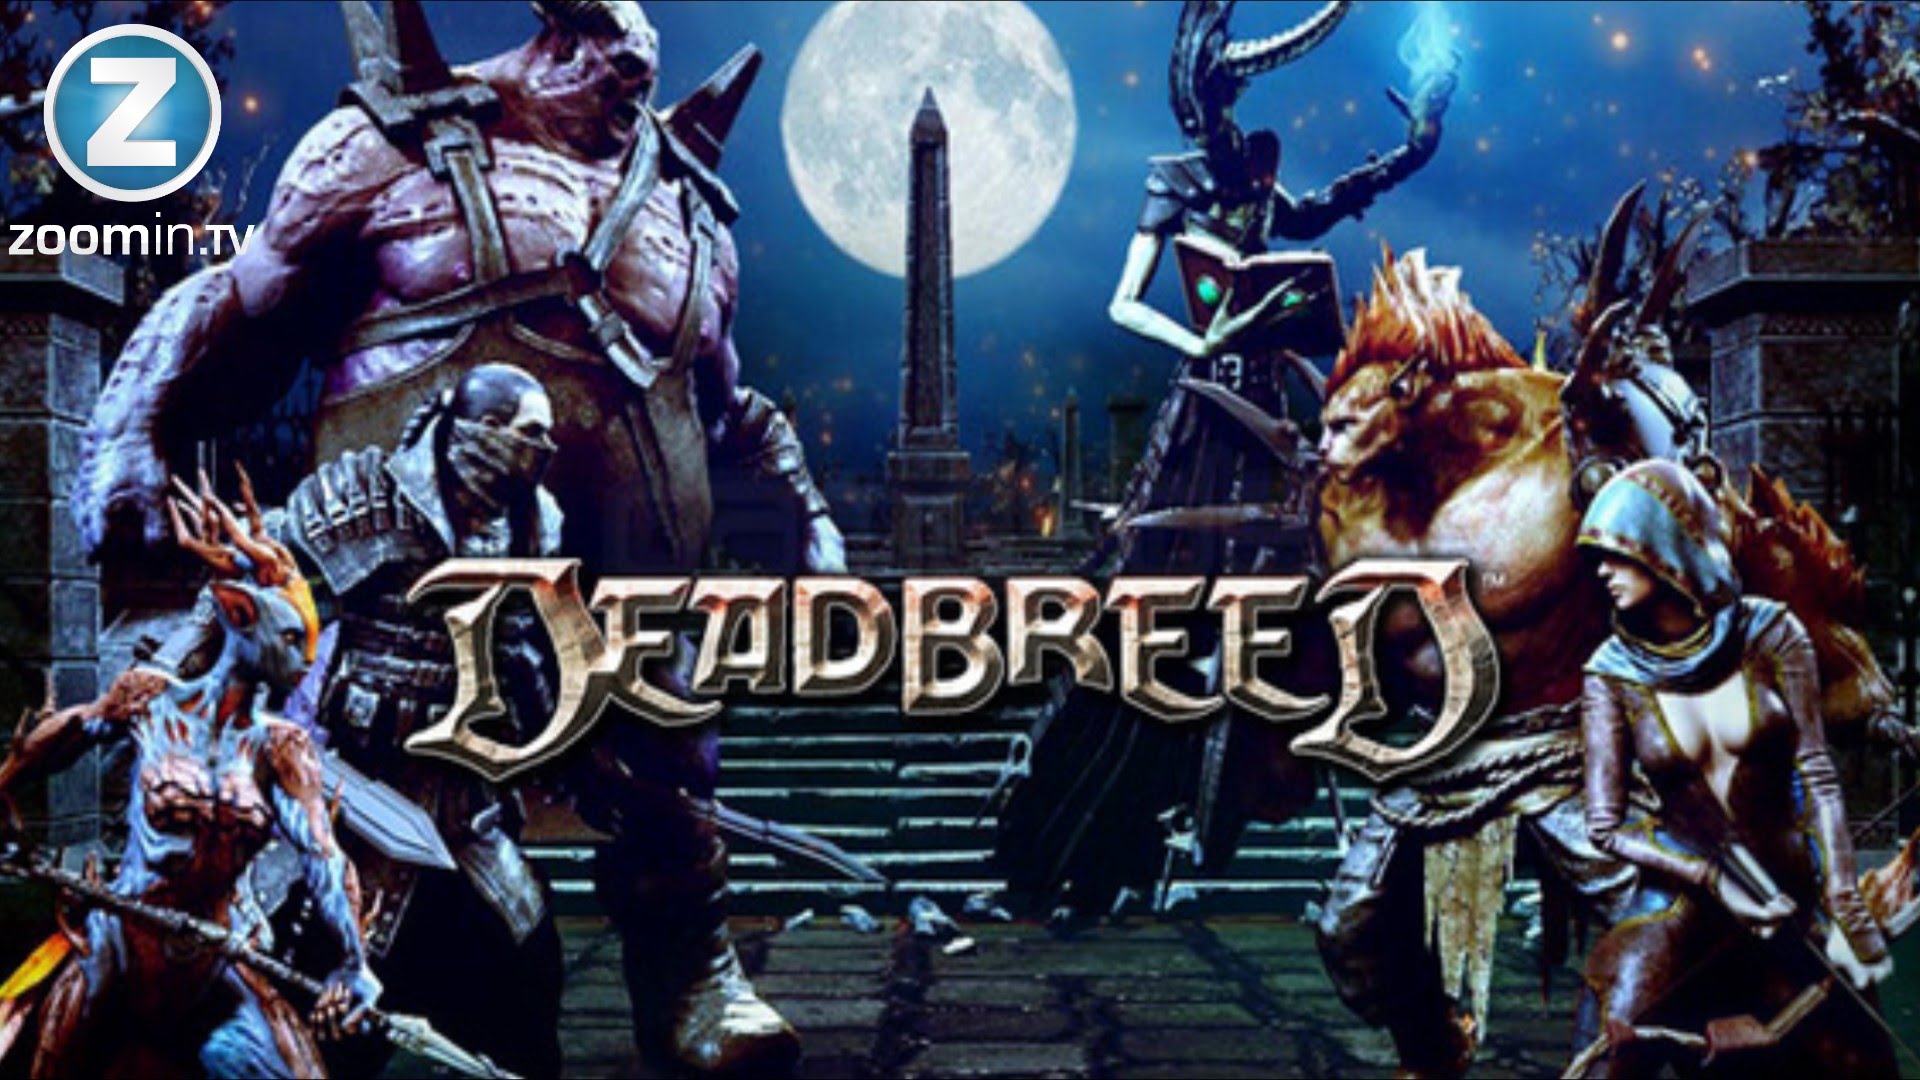 Nice Images Collection: Deadbreed Desktop Wallpapers